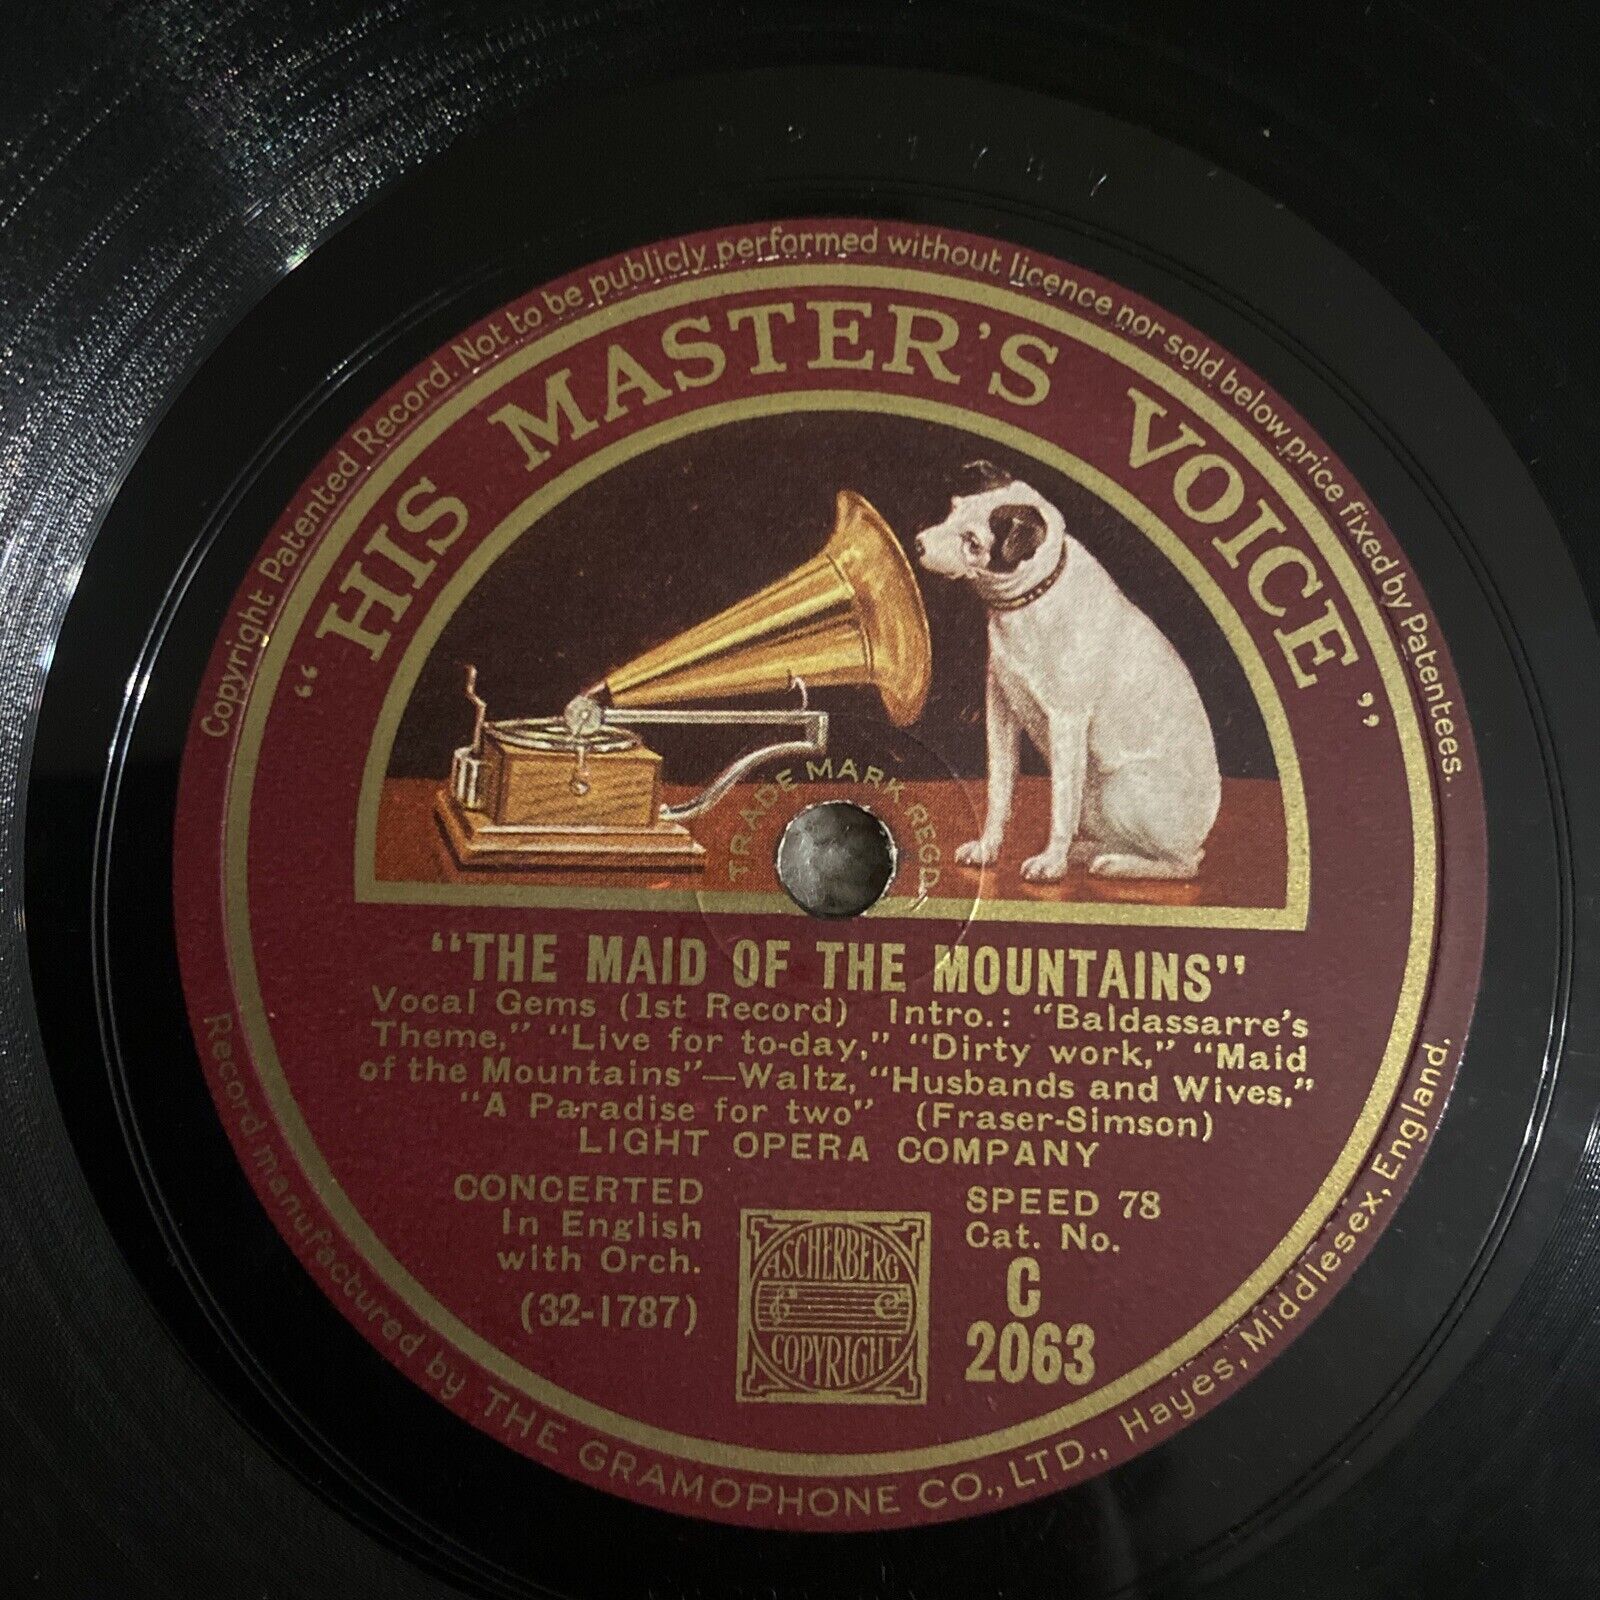 Vintage 78 Record Light Opera Company Harold Fraser-Simson Maid Of The Mountains